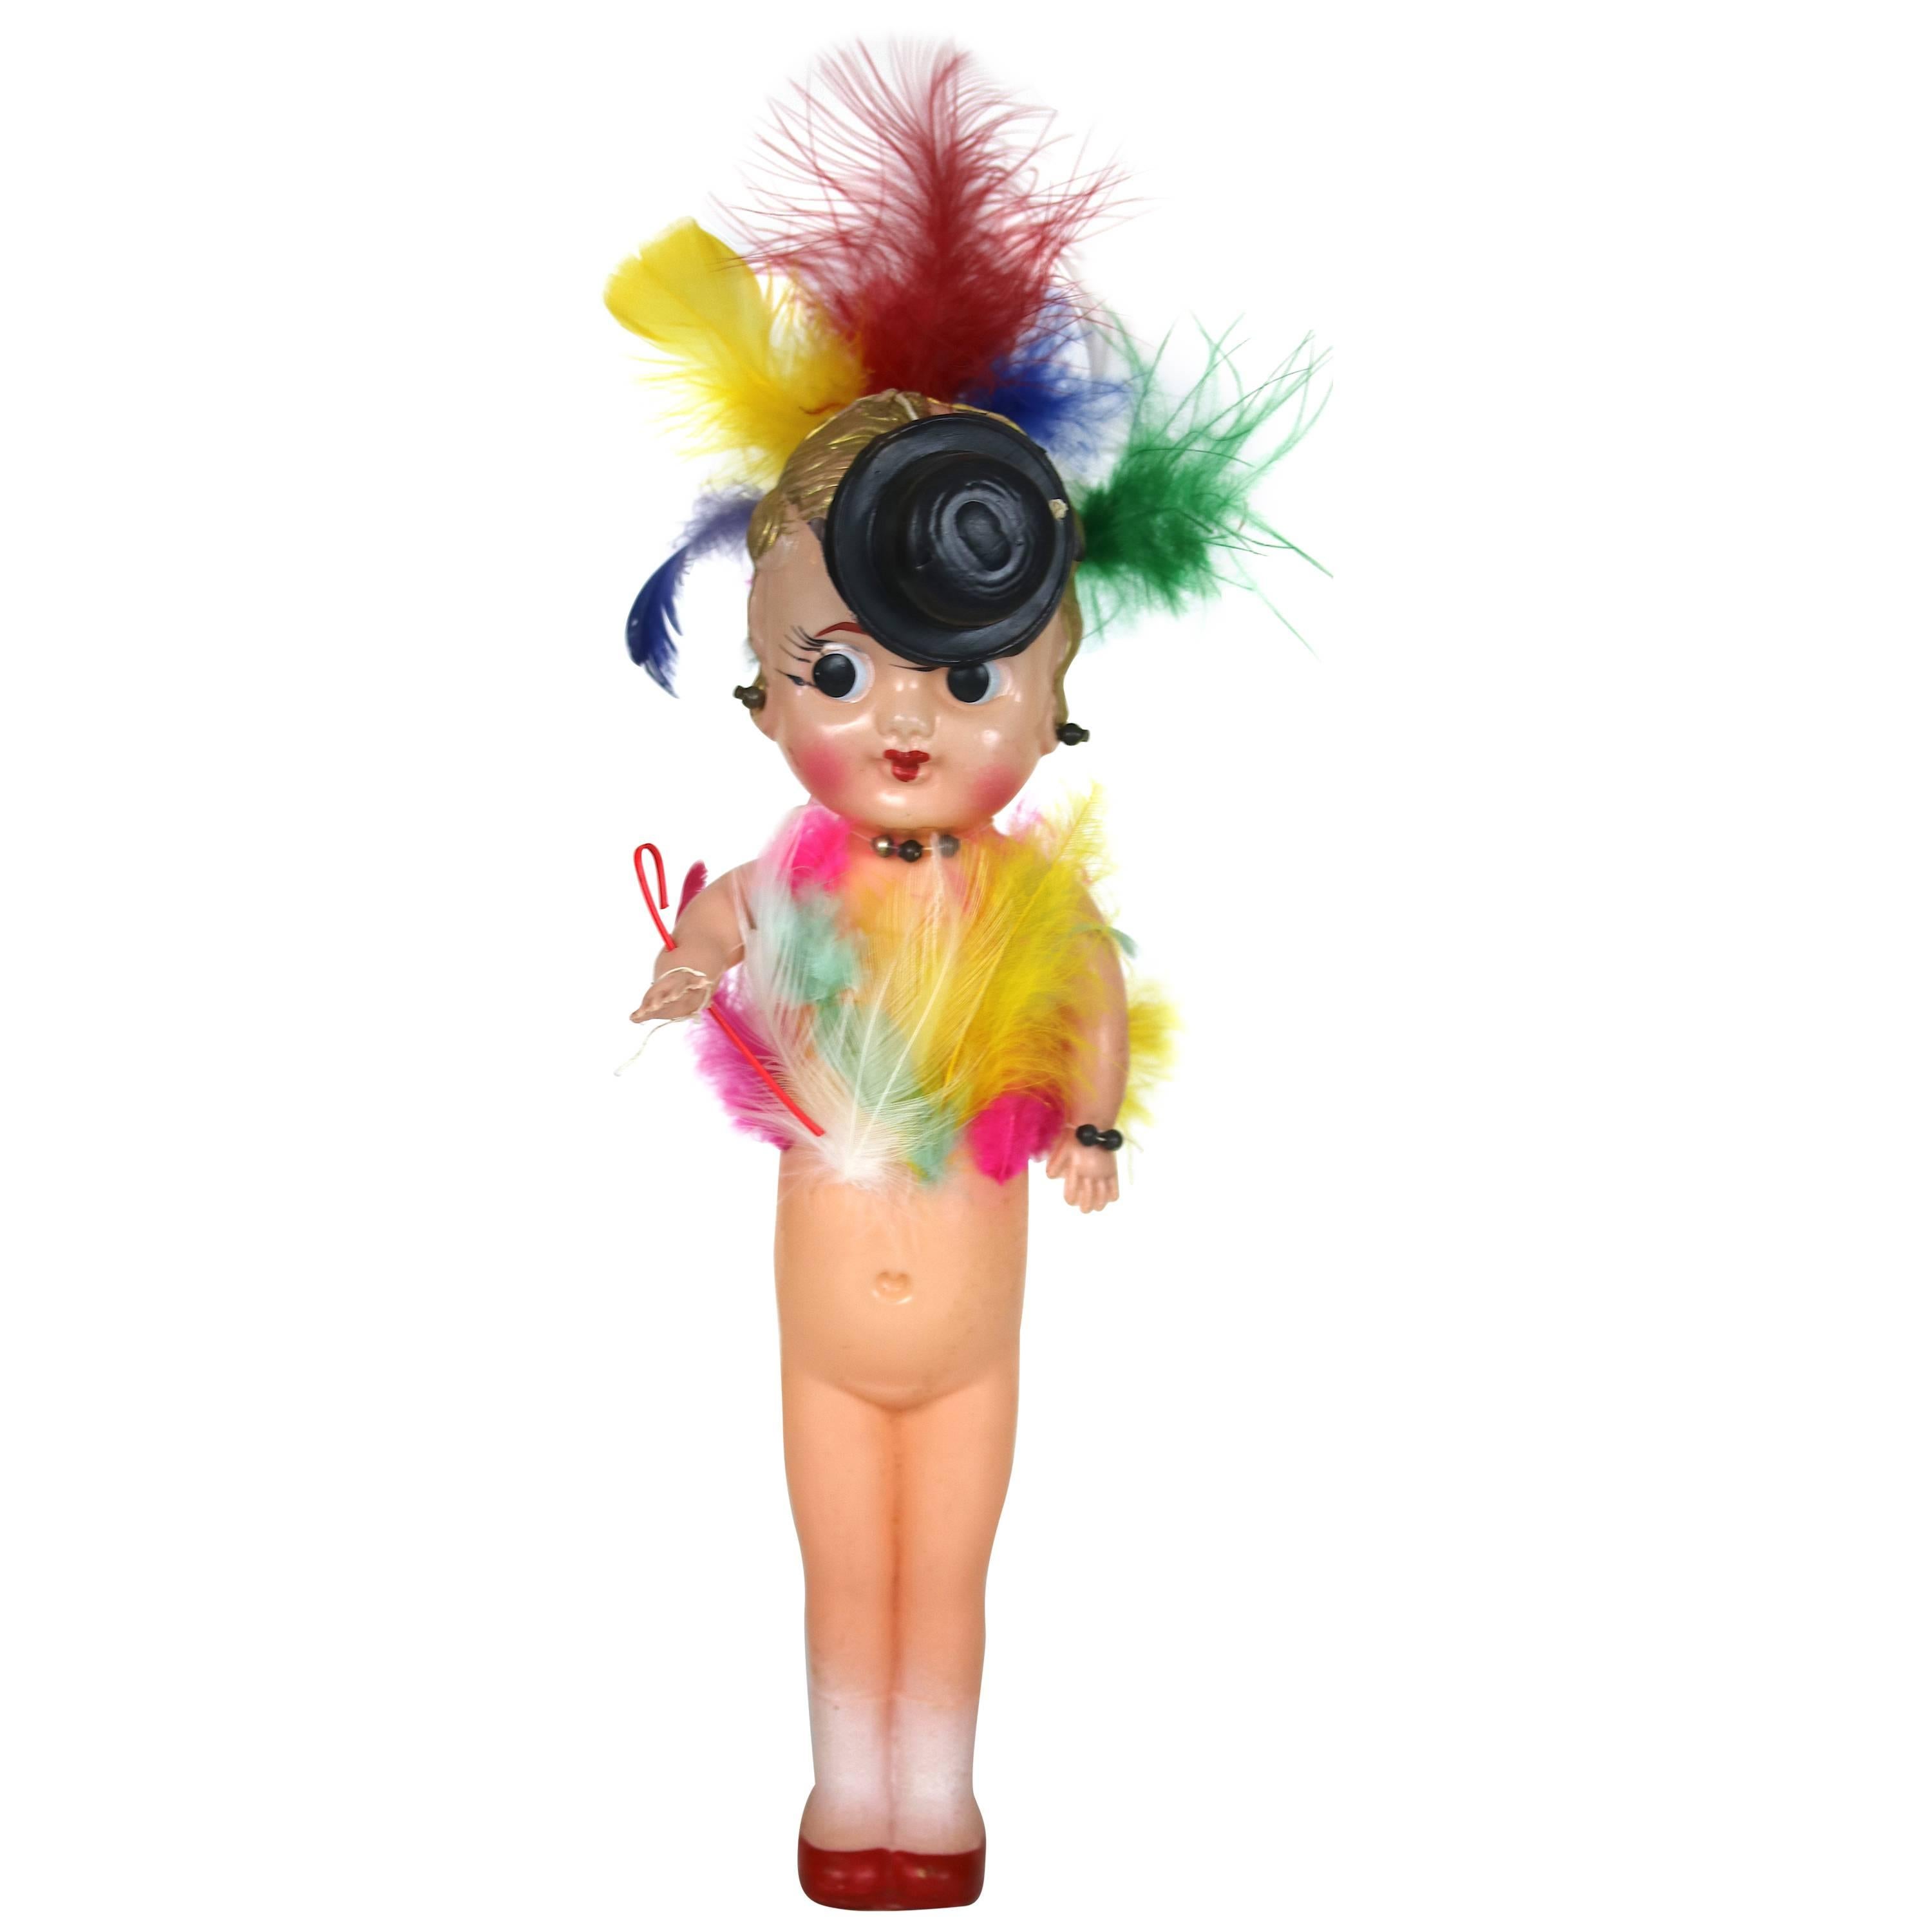 Vintage 1940s Celluloid Carnival Kewpie Doll--6 Available For Sale